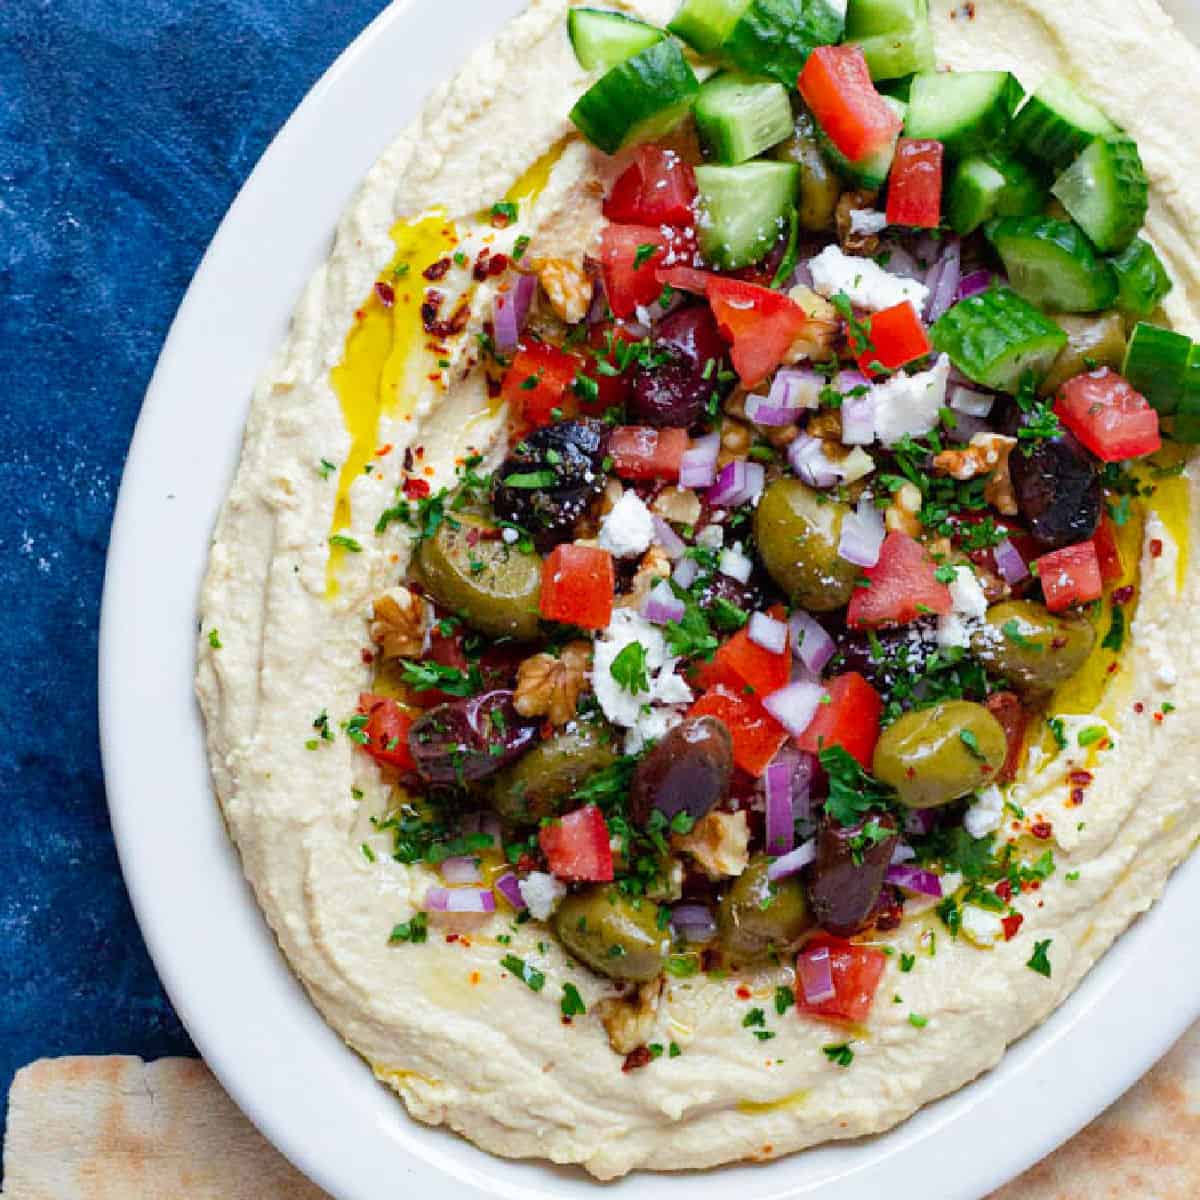 This loaded hummus recipe with all the fixings is ready in 15 minutes! Creamy hummus is topped with delicious toppings and served with pita!
